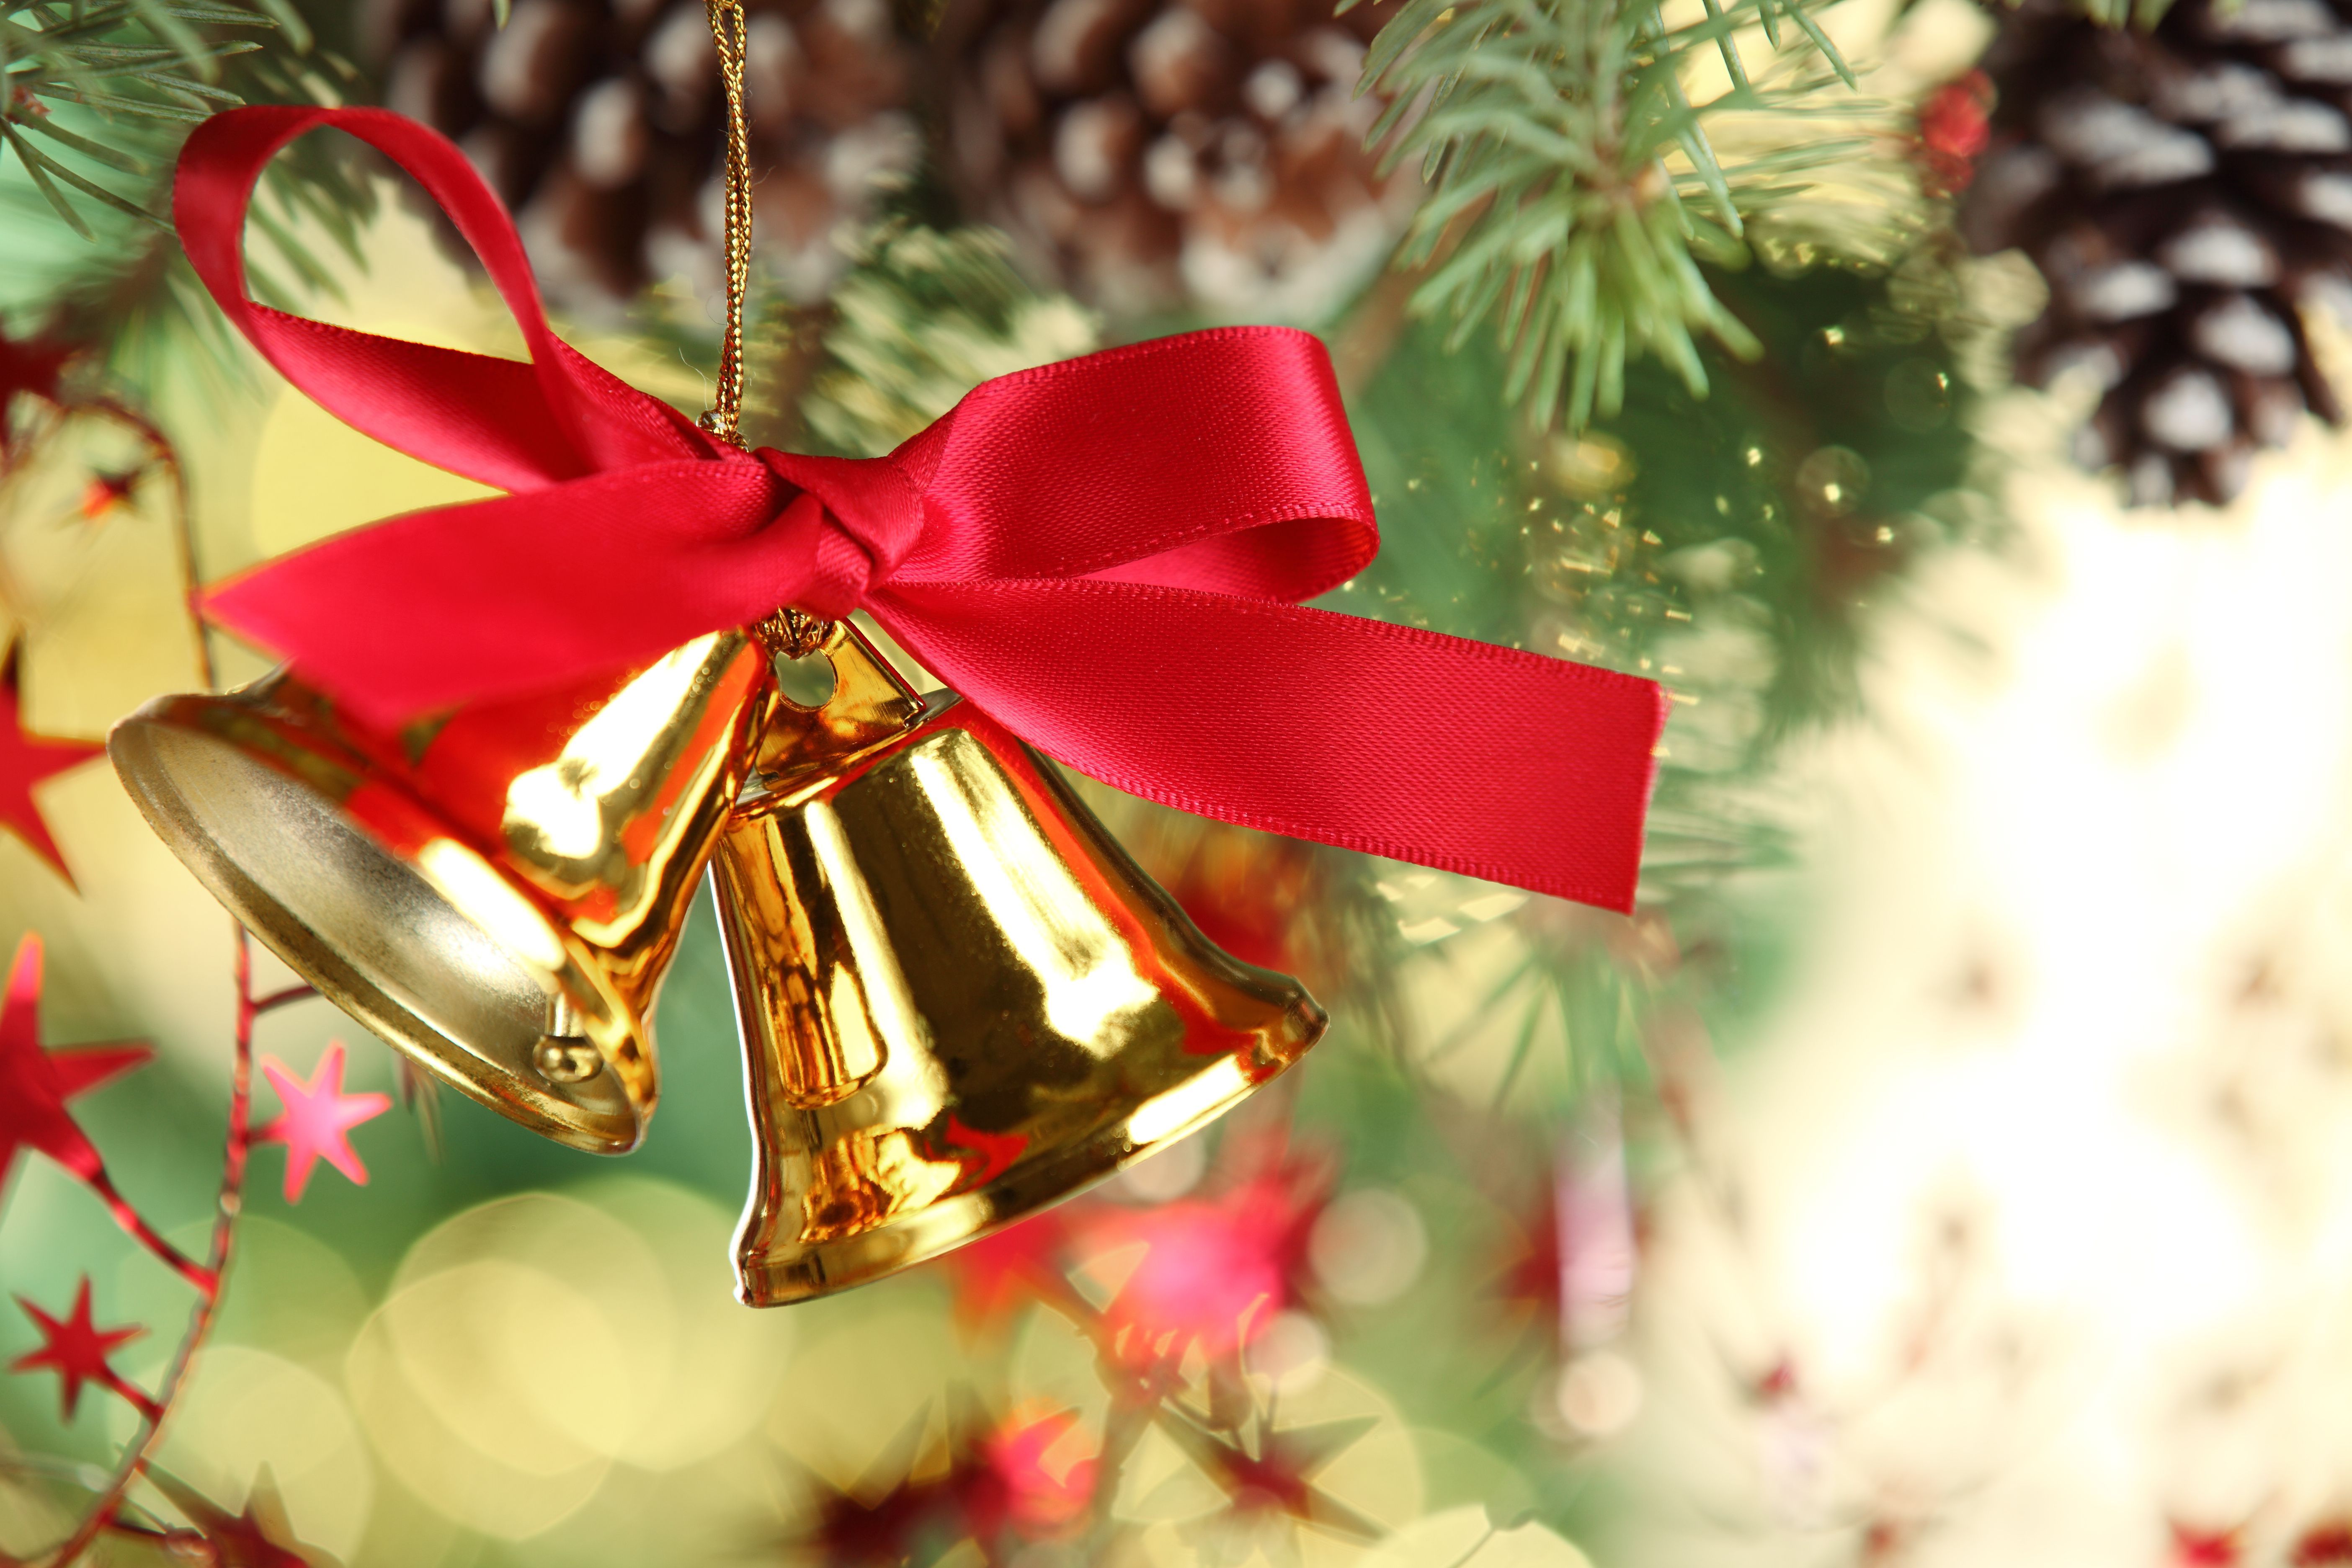 Free Decorative Christmas Bell Image HD Wallpaper Happy